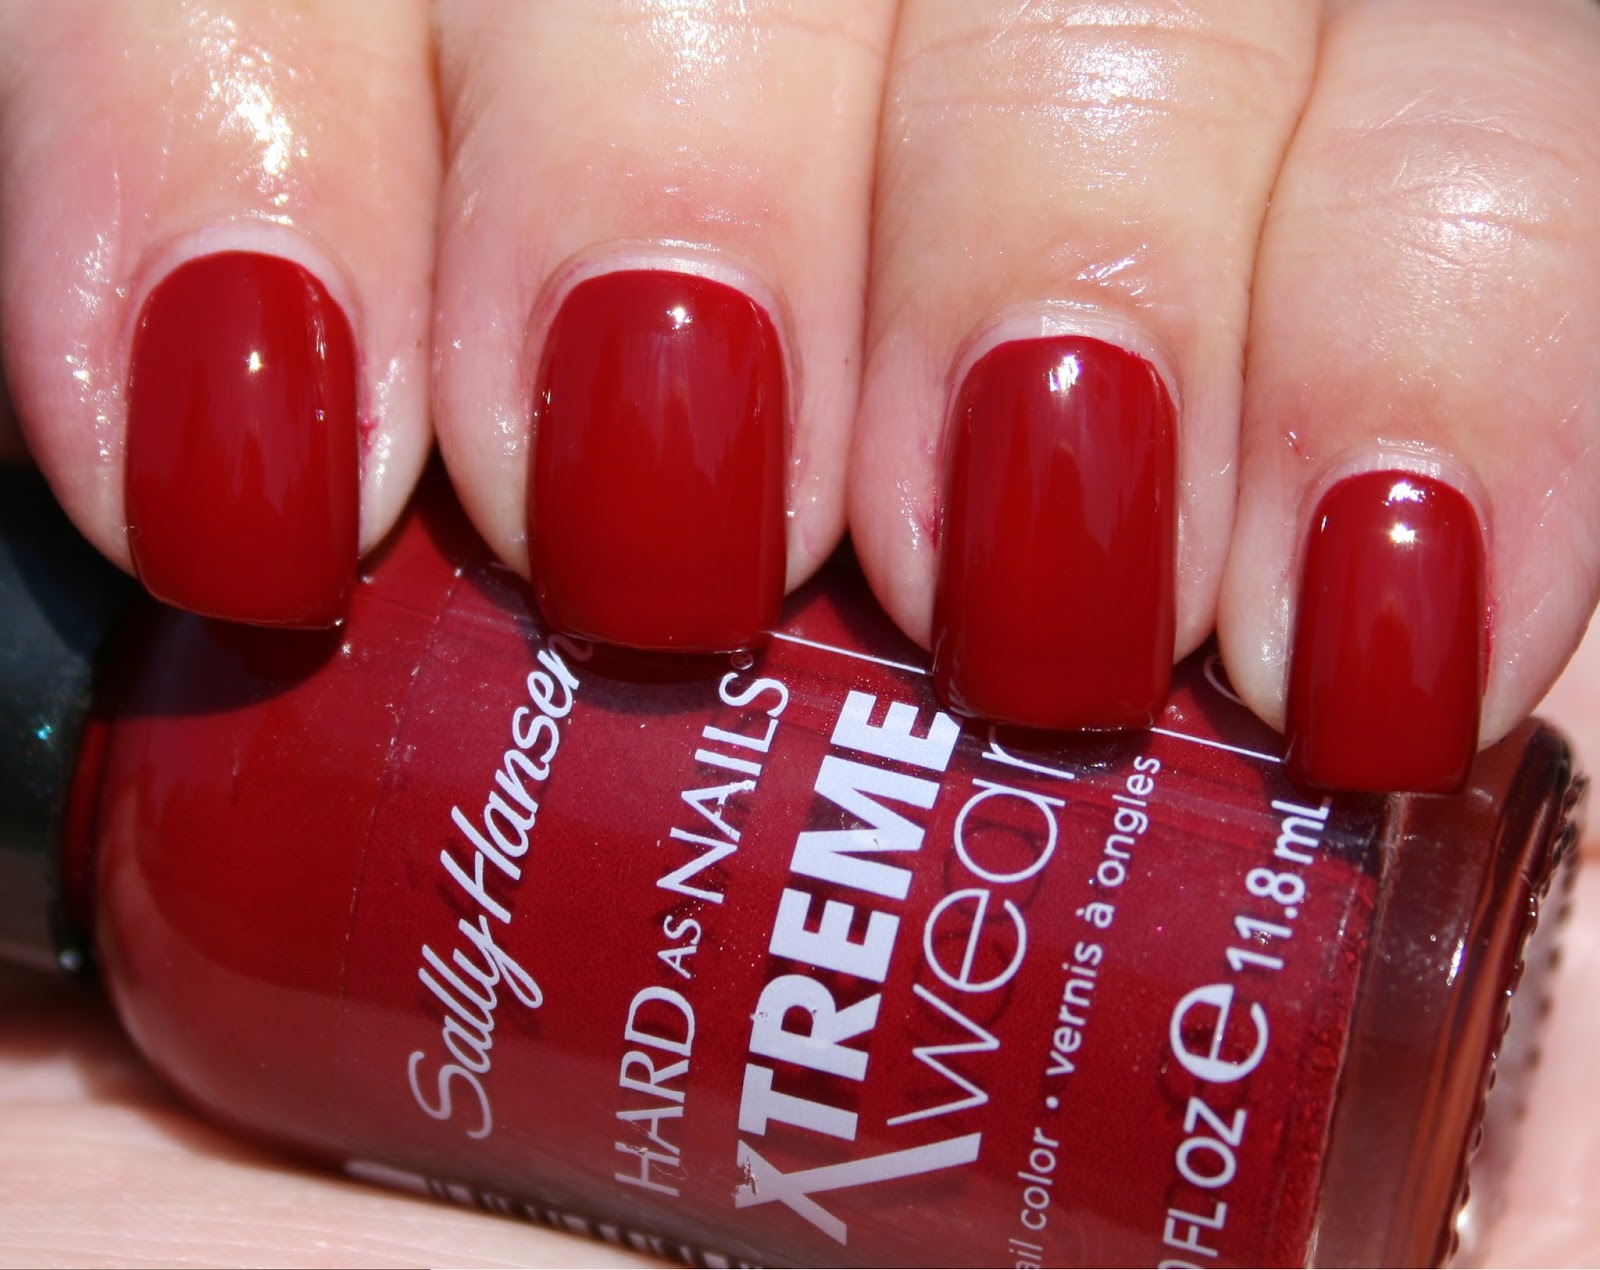 Sally Hansen Hard as Nails Xtreme Wear Nail Color, Vanity Fairest - wide 8